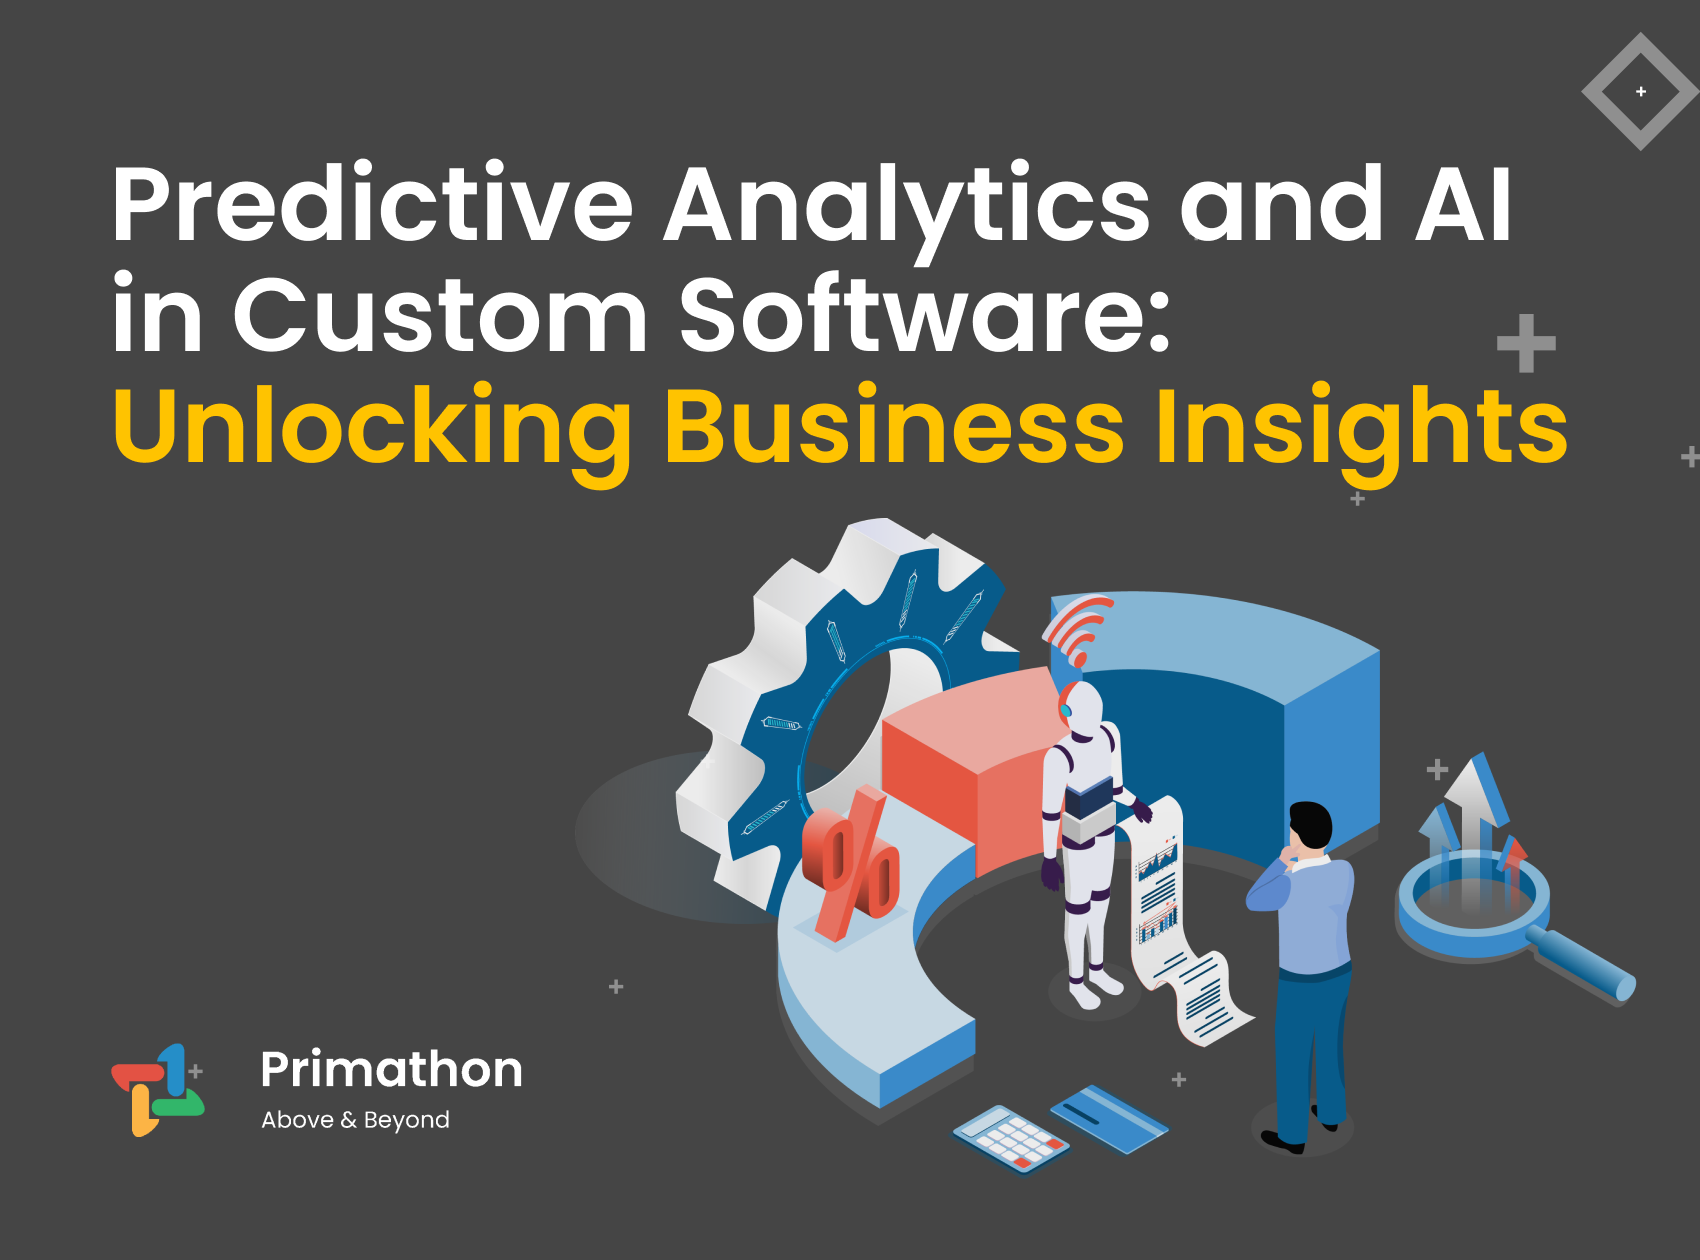 Predictive Analytics and AI in Custom Software: Unlocking Business Insights